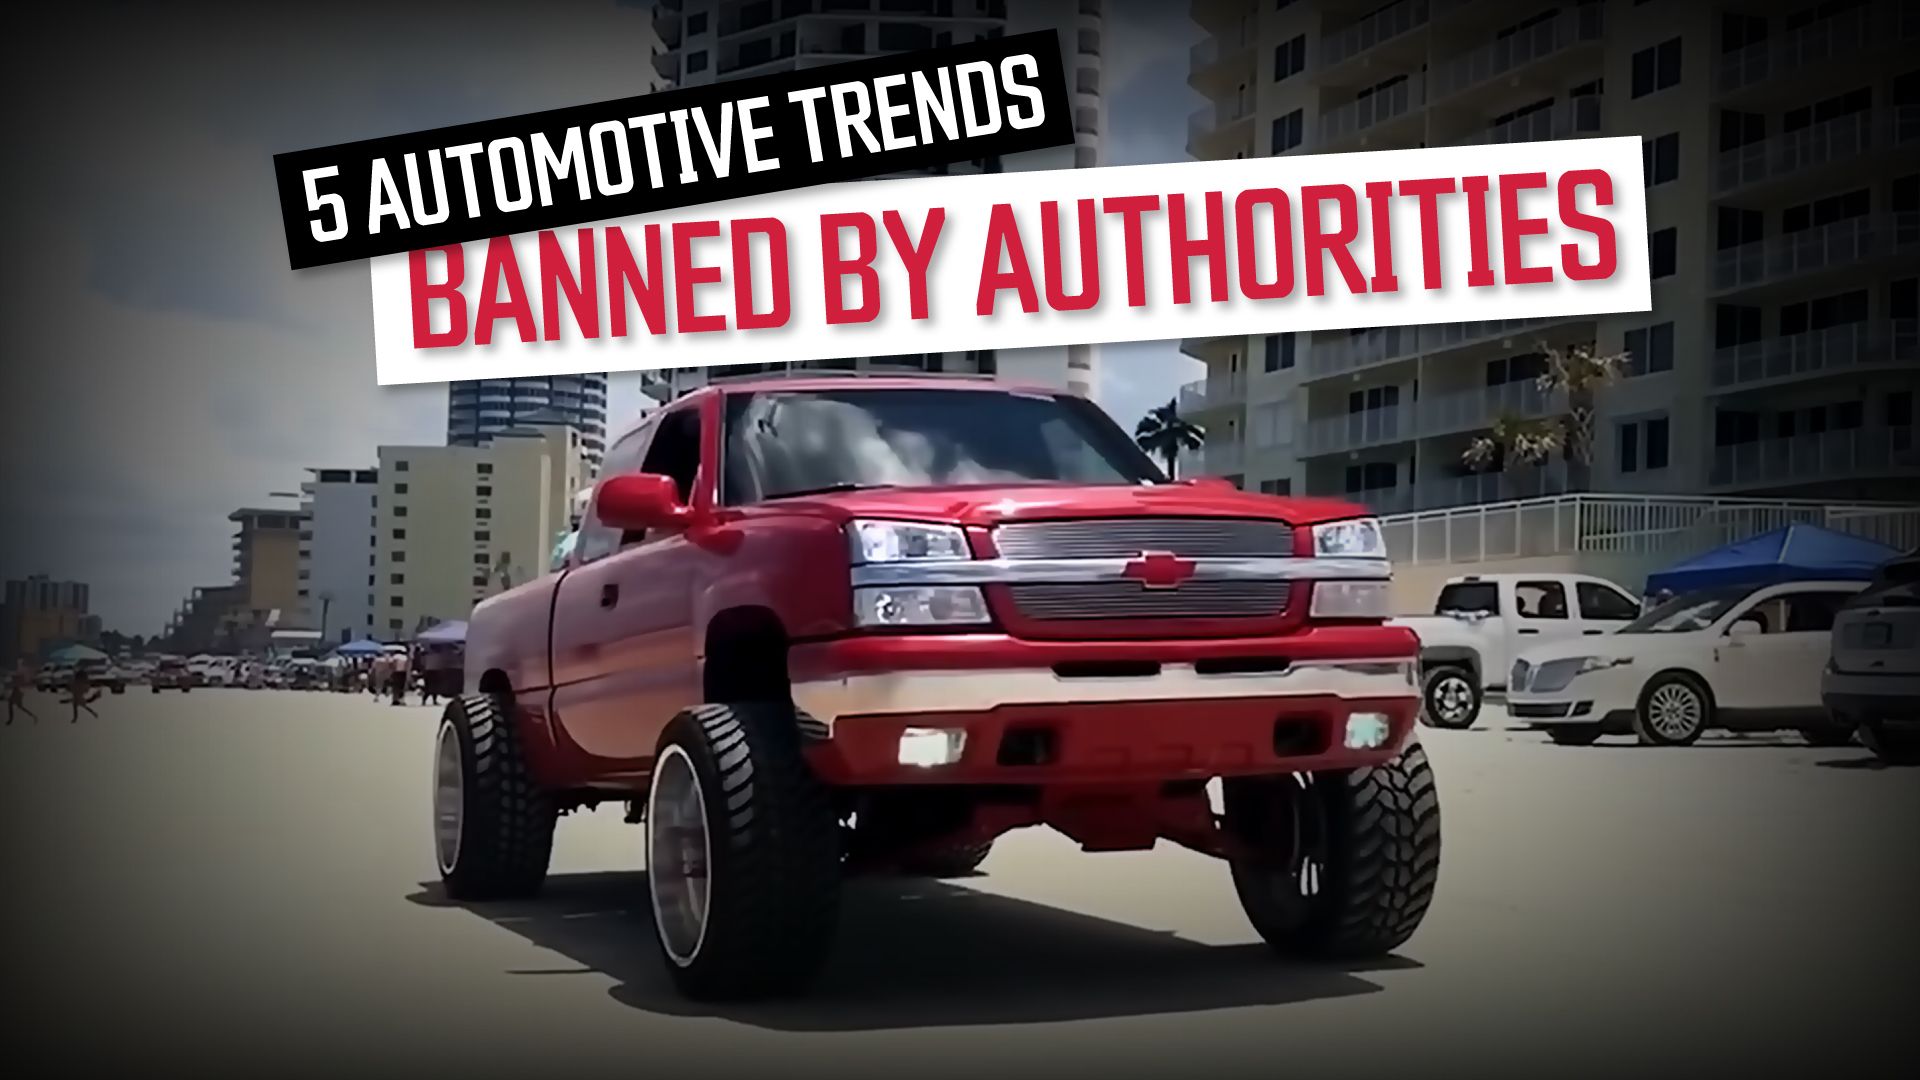 Automotive-Trends-Banned-By-Authorities